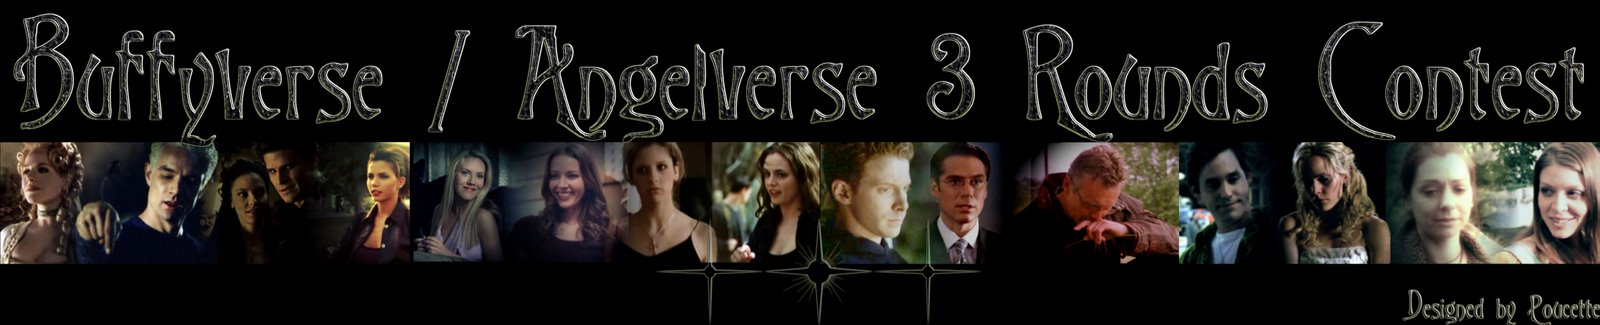 BUFFYVERSE / ANGELVERSE 3 ROUNDS CONTEST AWARDS